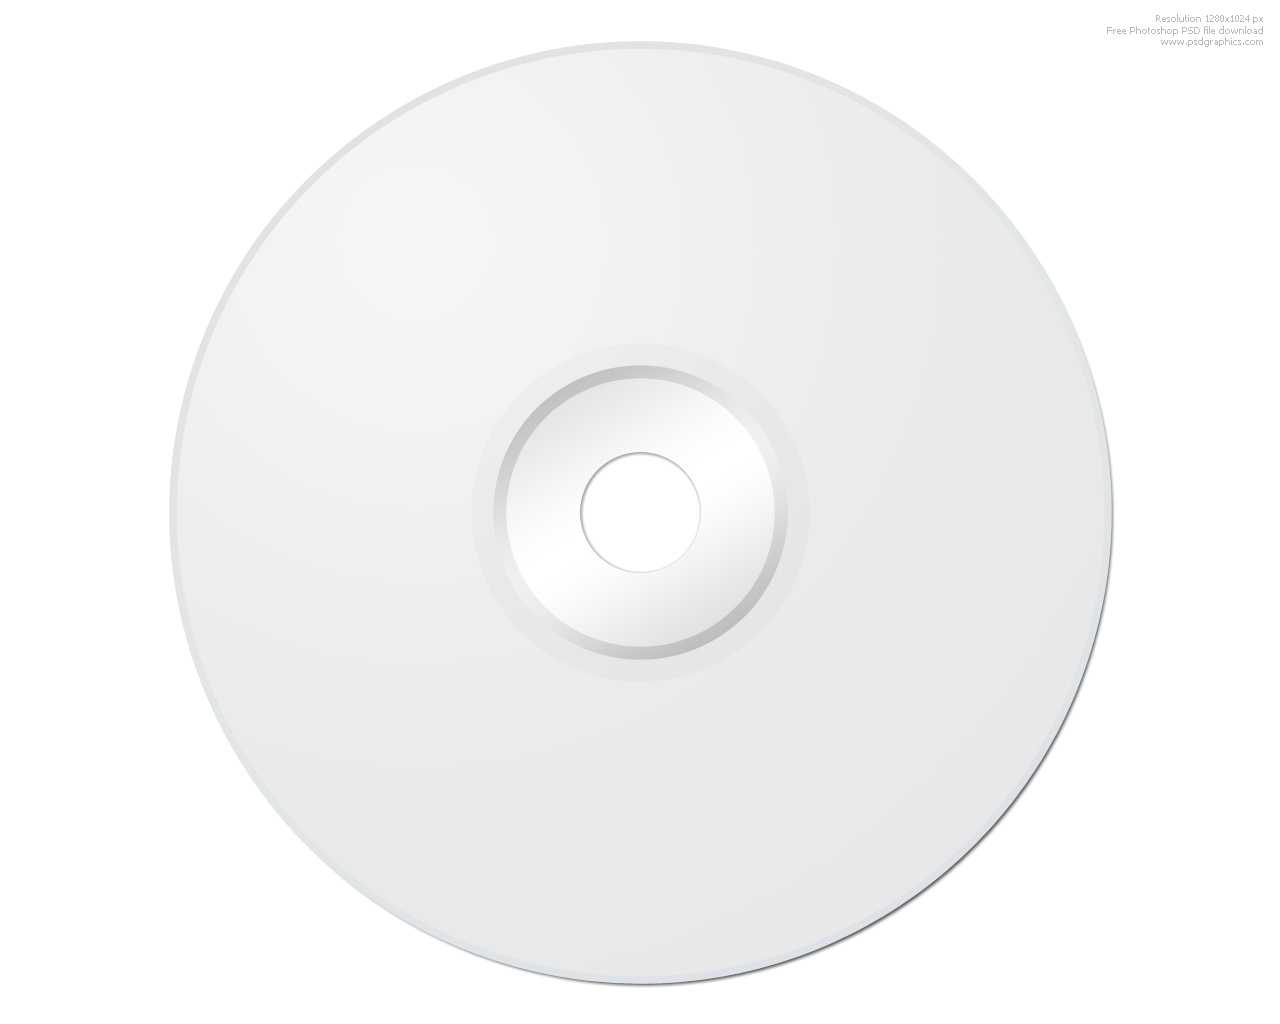 Memorex Cd Label Template Word Free Download – Teplates For Throughout Blank Cd Template Word